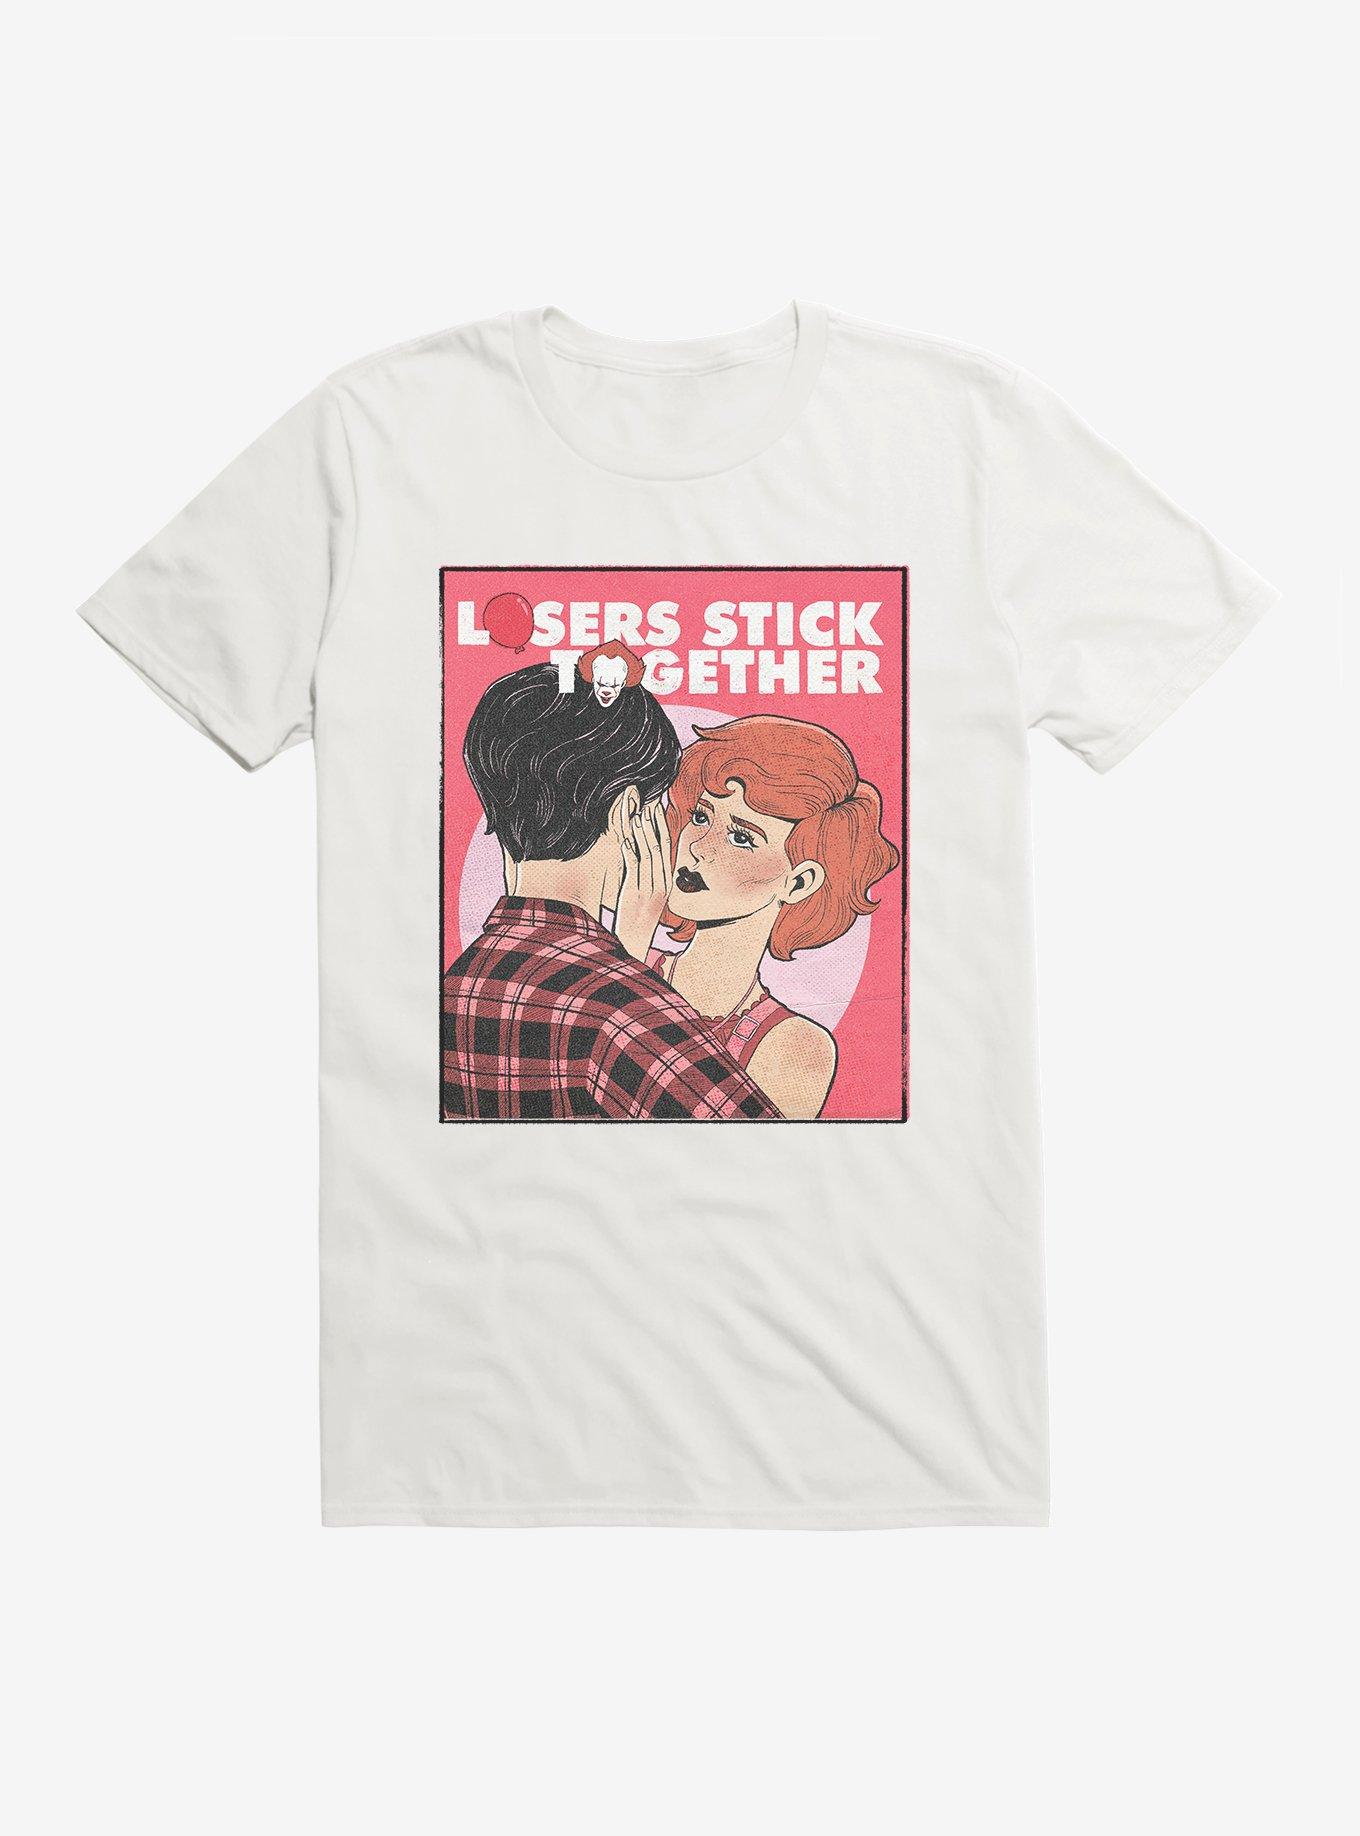 IT2 Losers Stick Together T-Shirt, WHITE, hi-res